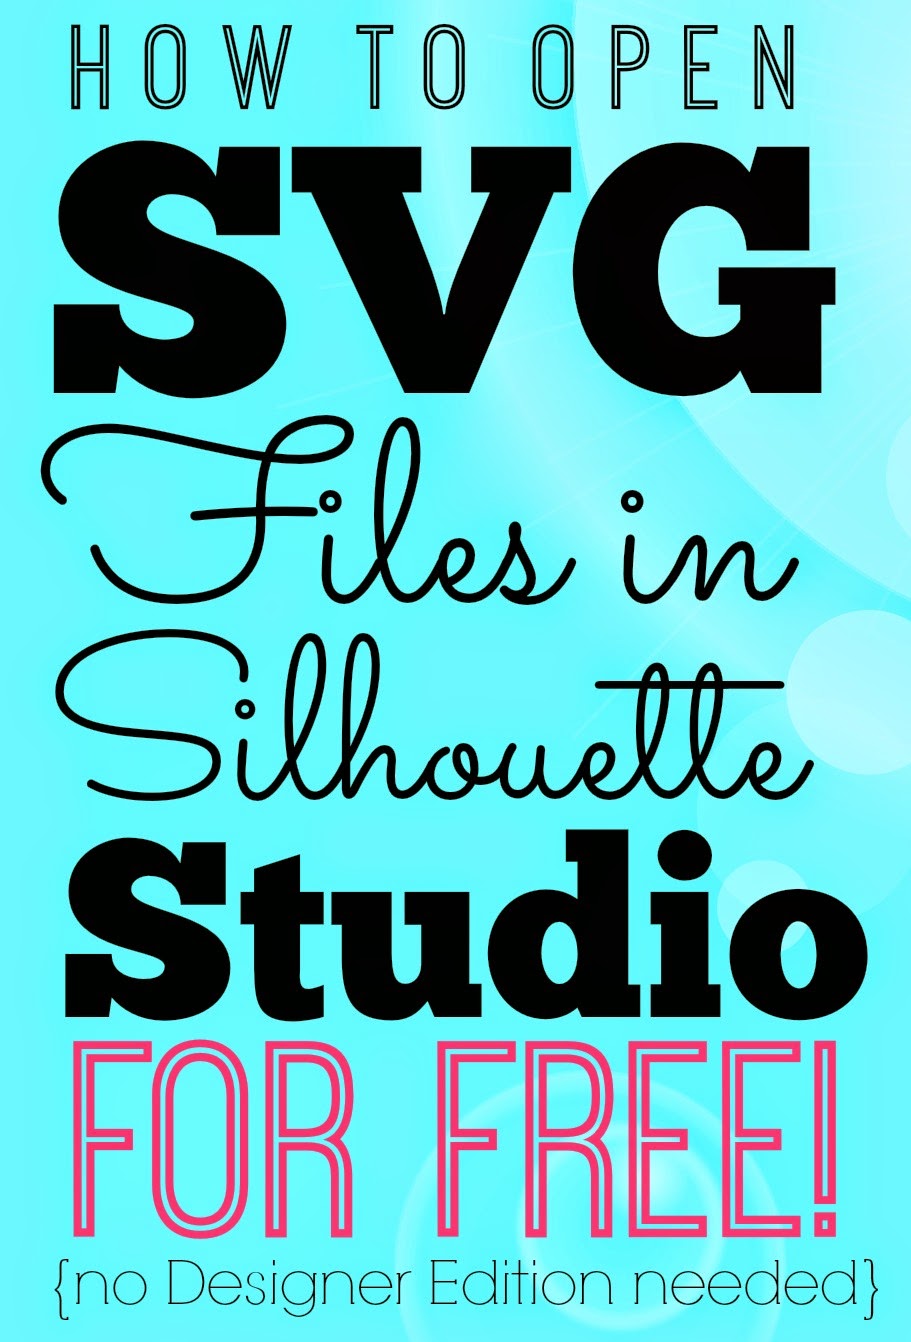 Download Free Svg Cut Files For Silhouette Cameo 3 - 183+ Crafter Files for Cricut, Silhouette and Other Machine